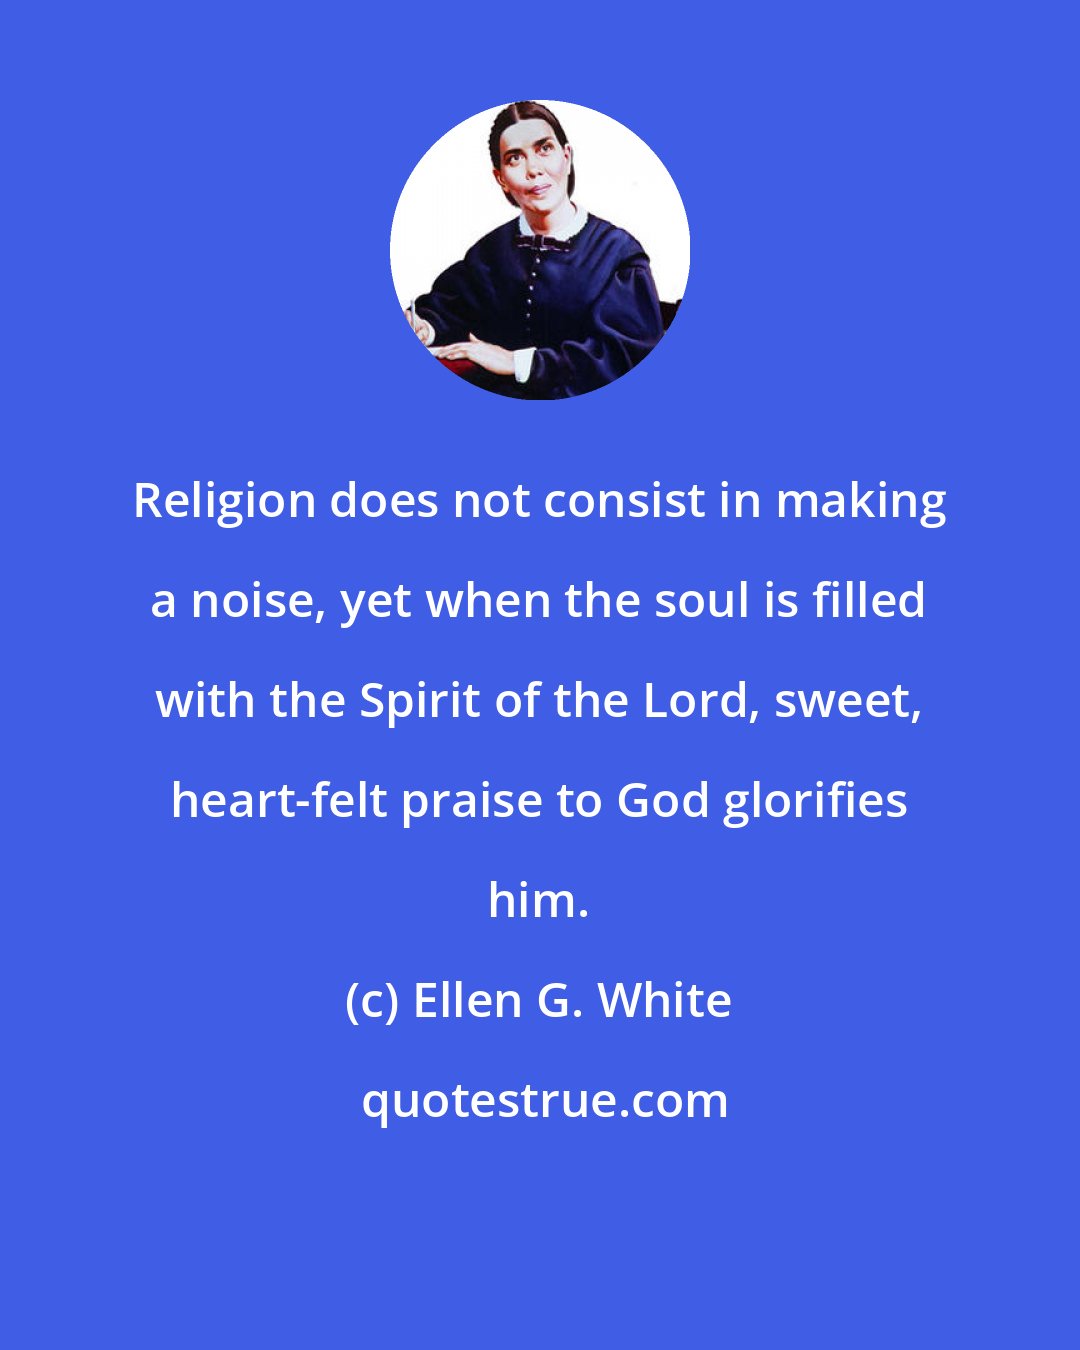 Ellen G. White: Religion does not consist in making a noise, yet when the soul is filled with the Spirit of the Lord, sweet, heart-felt praise to God glorifies him.